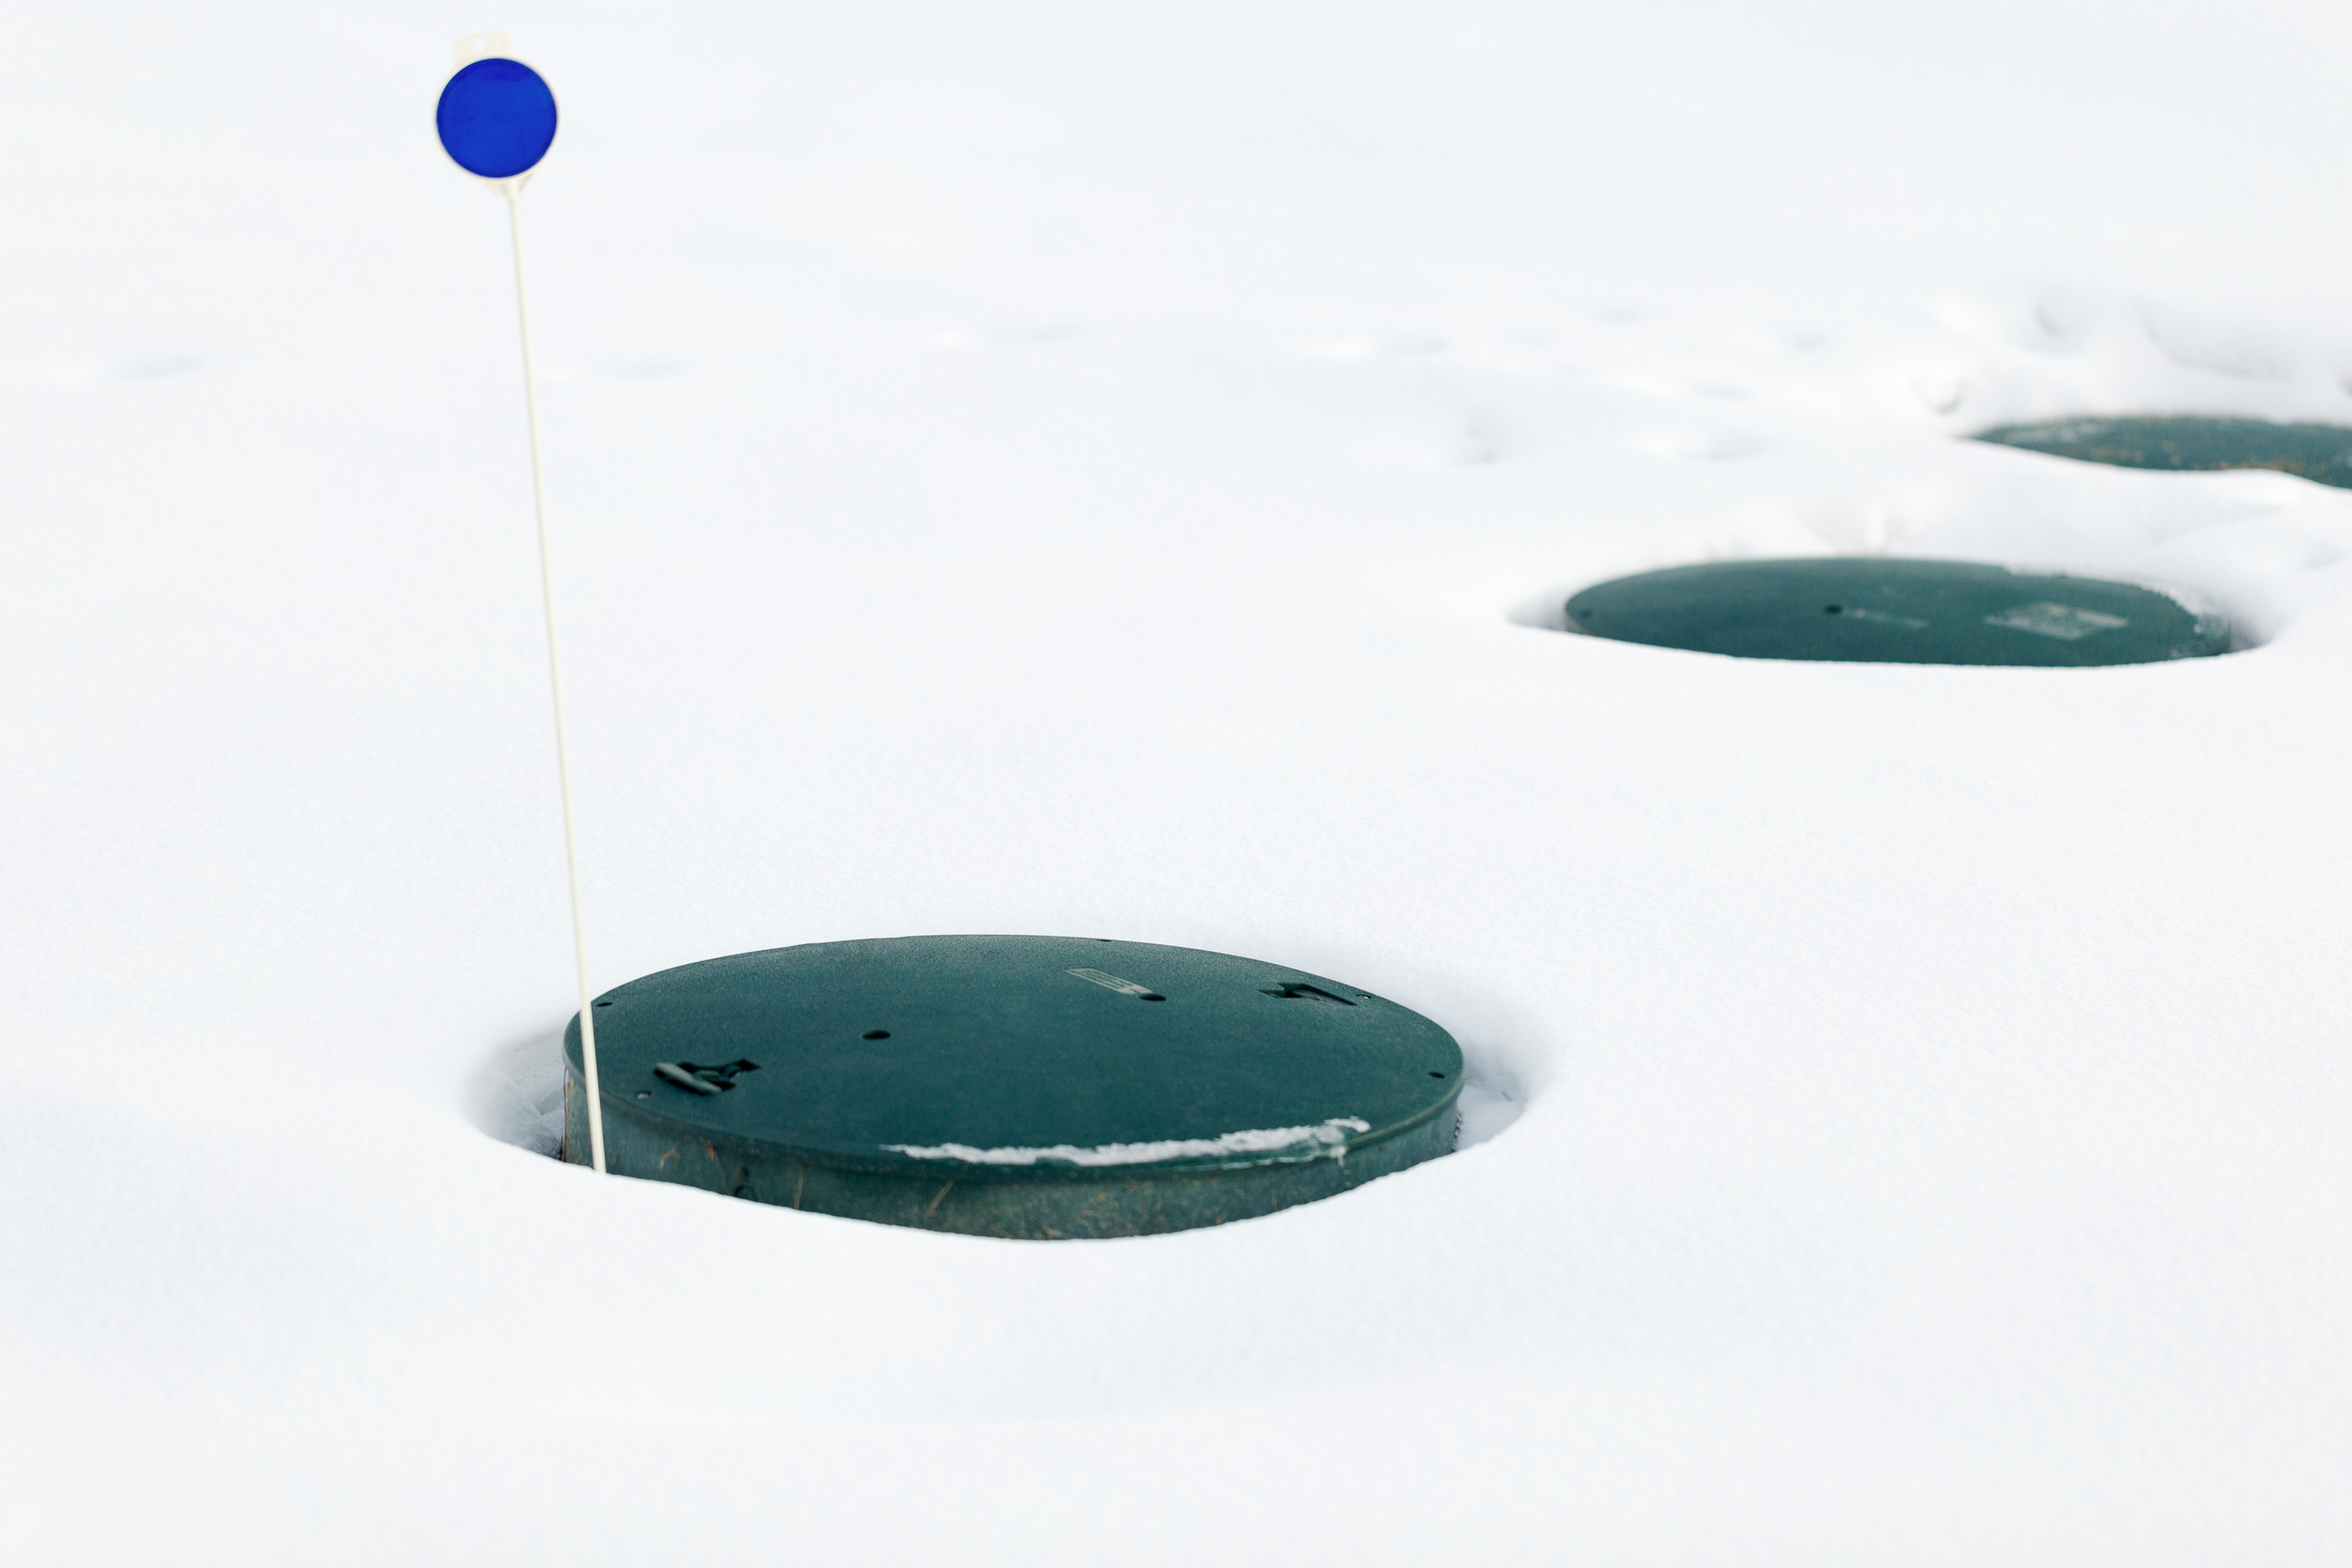 Septic Tank lids sticking out of snow.